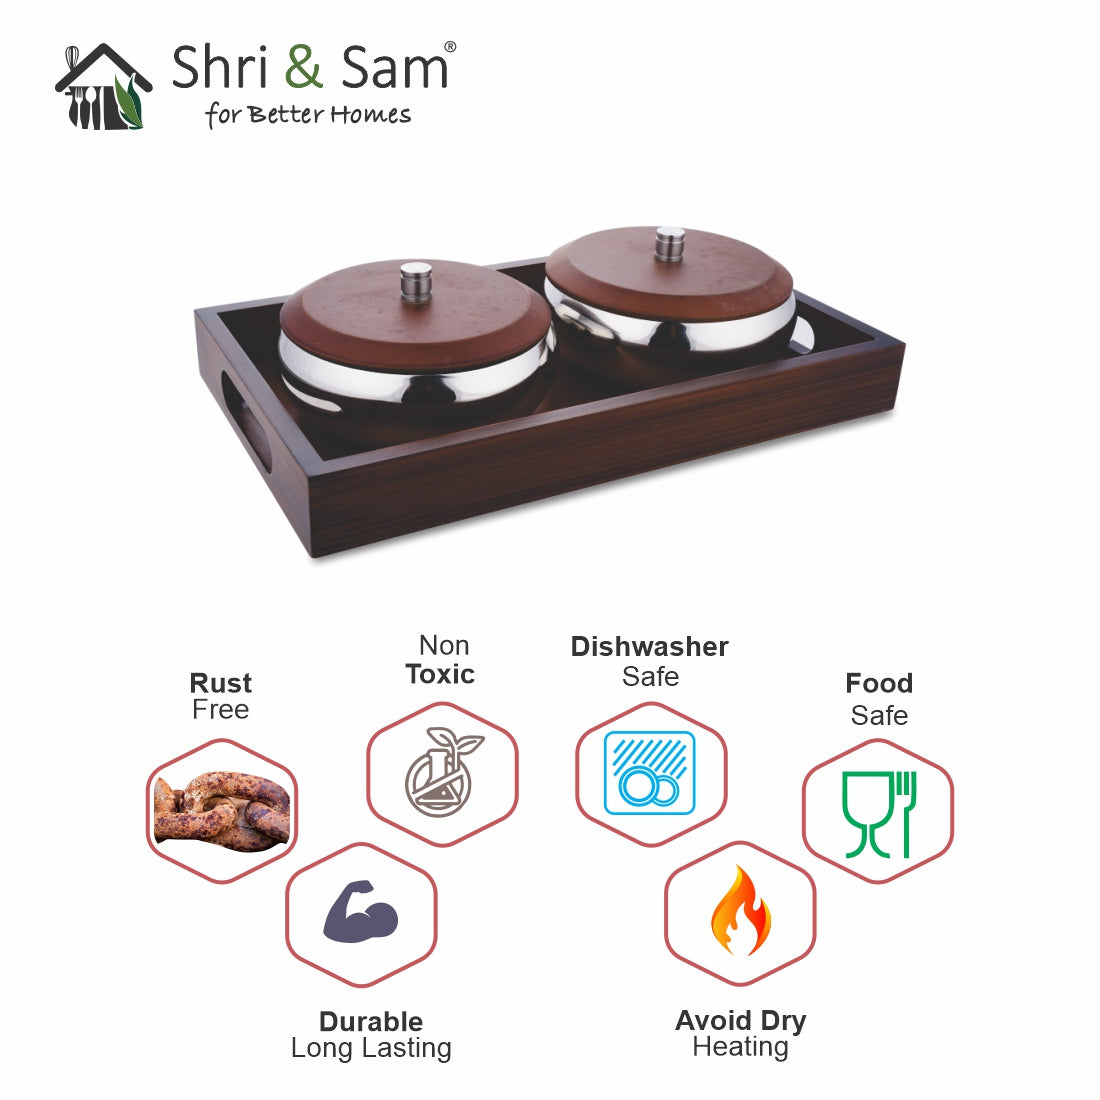 Stainless Steel 2 PCS Bowl with Wooden Tray and Lid Soprano